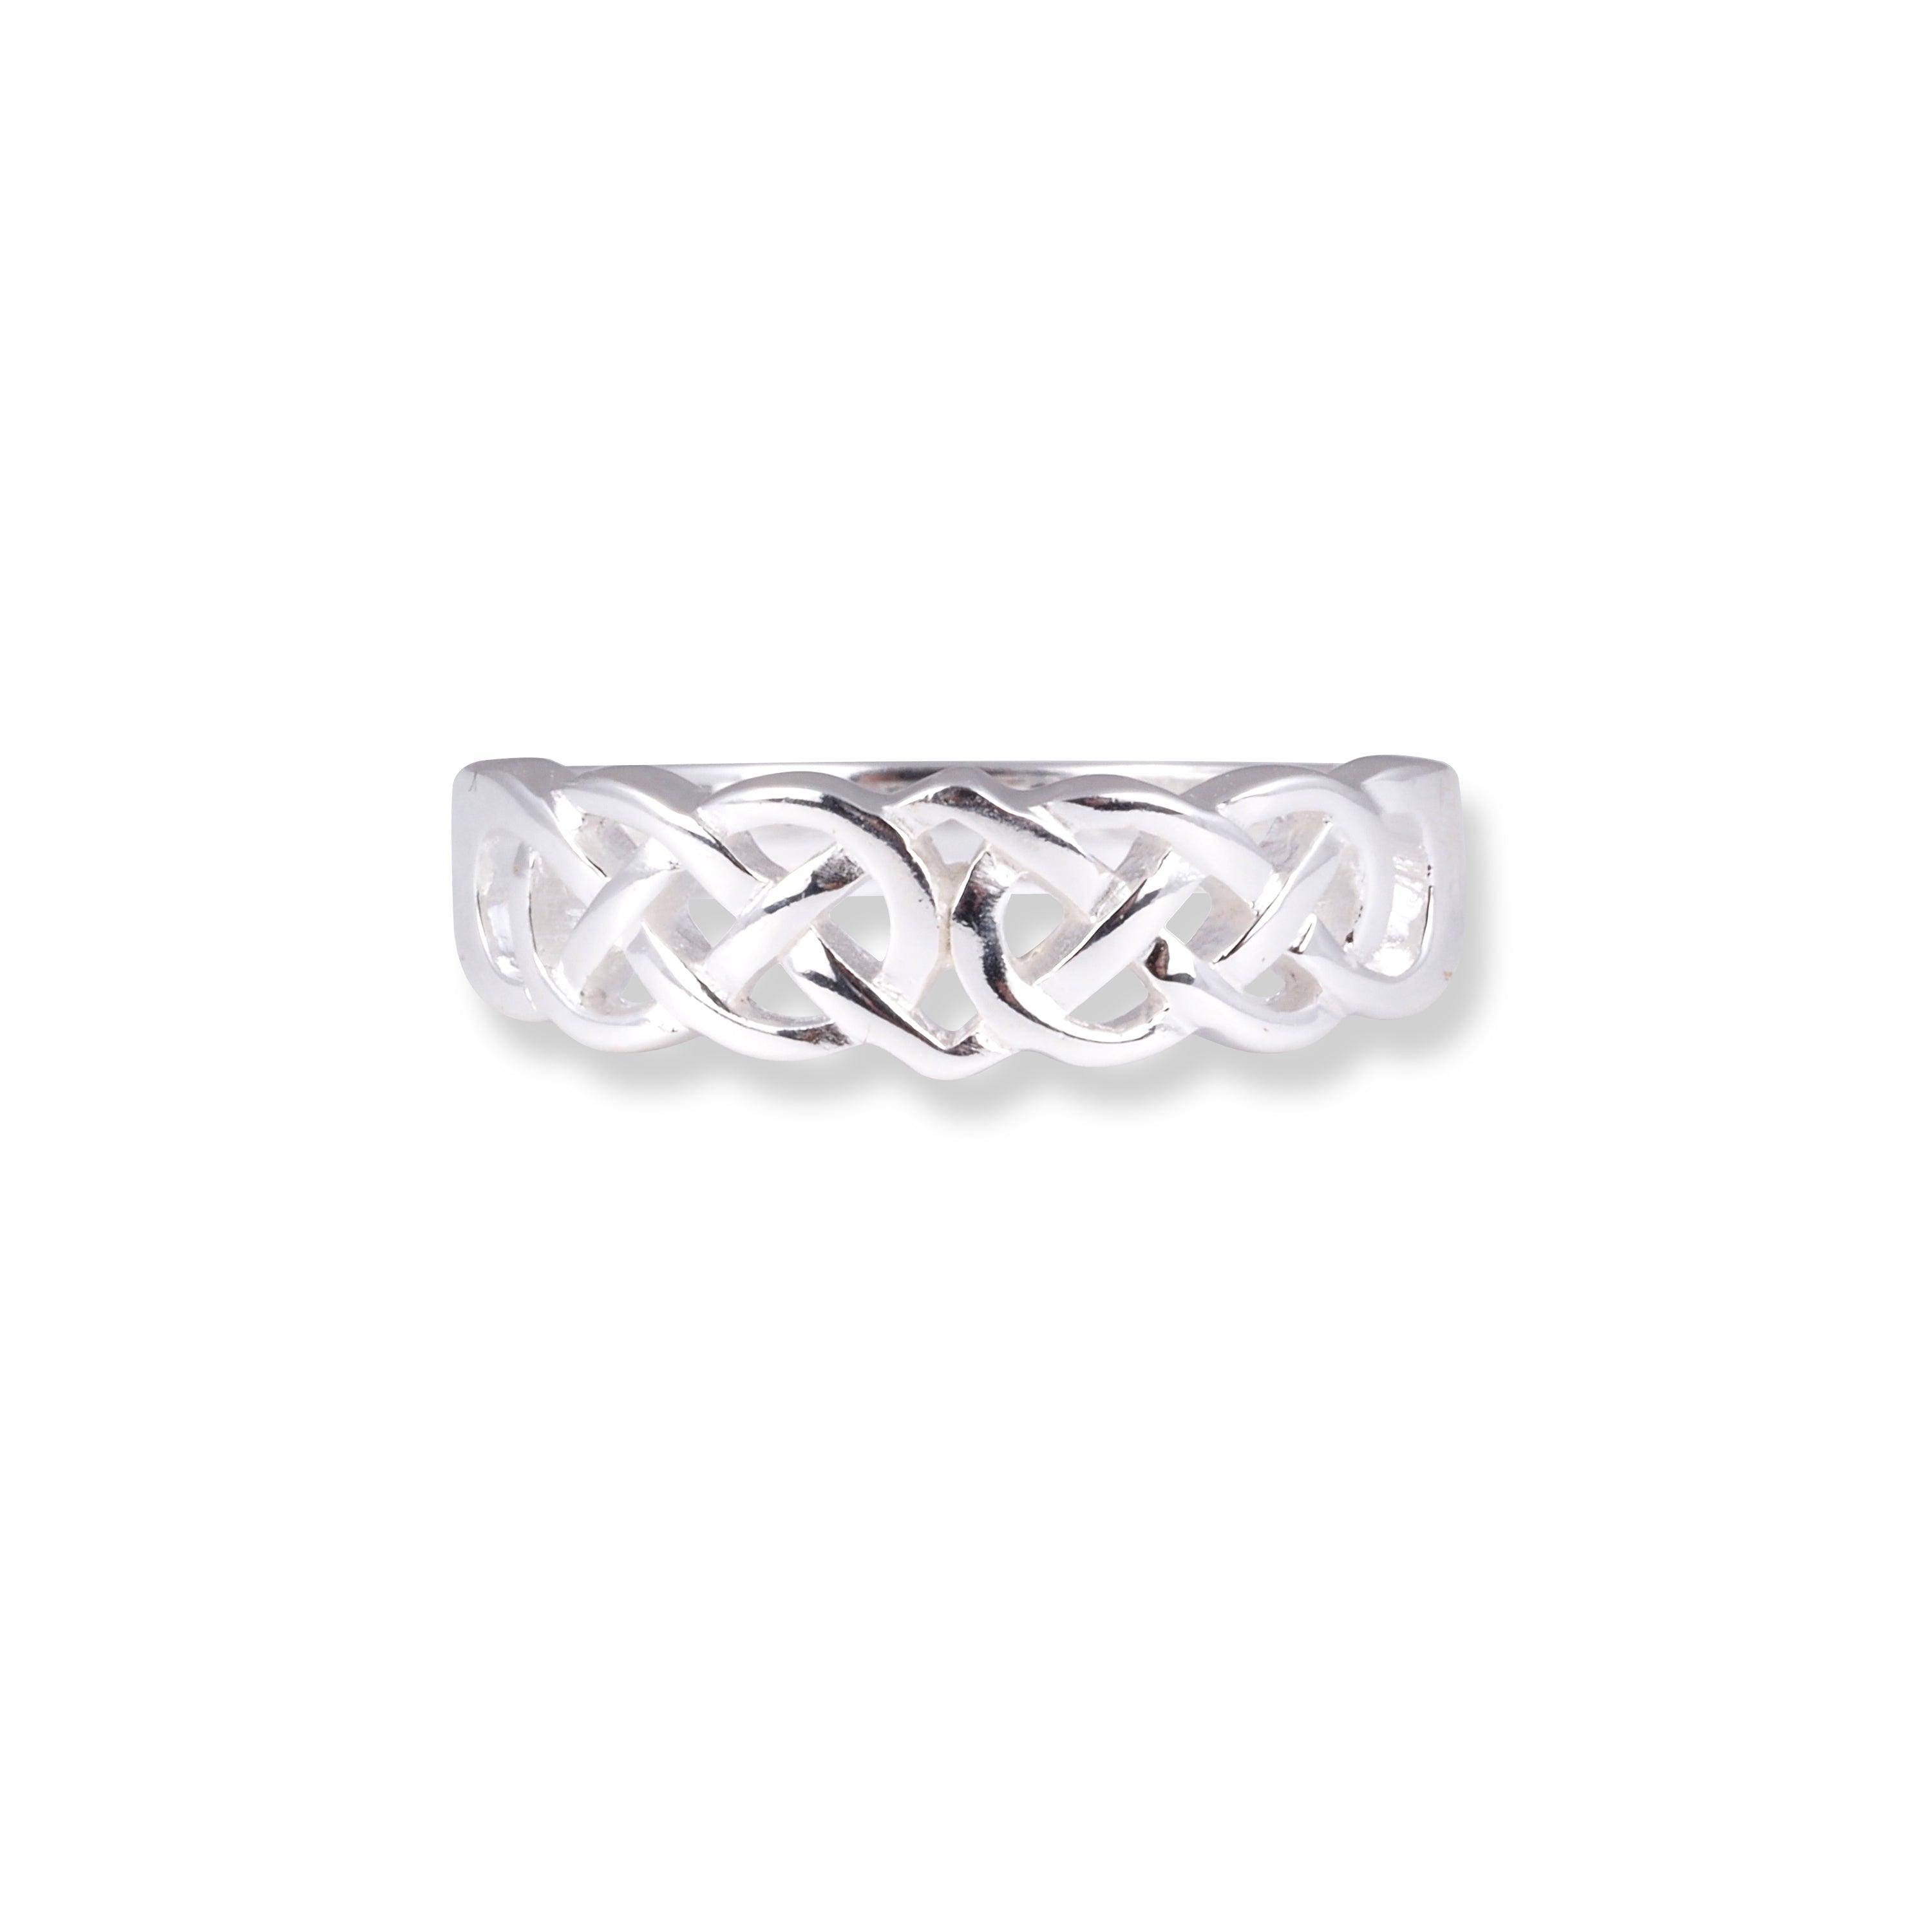 Sterling Silver Celtic Ring S253 - Minar Jewellers